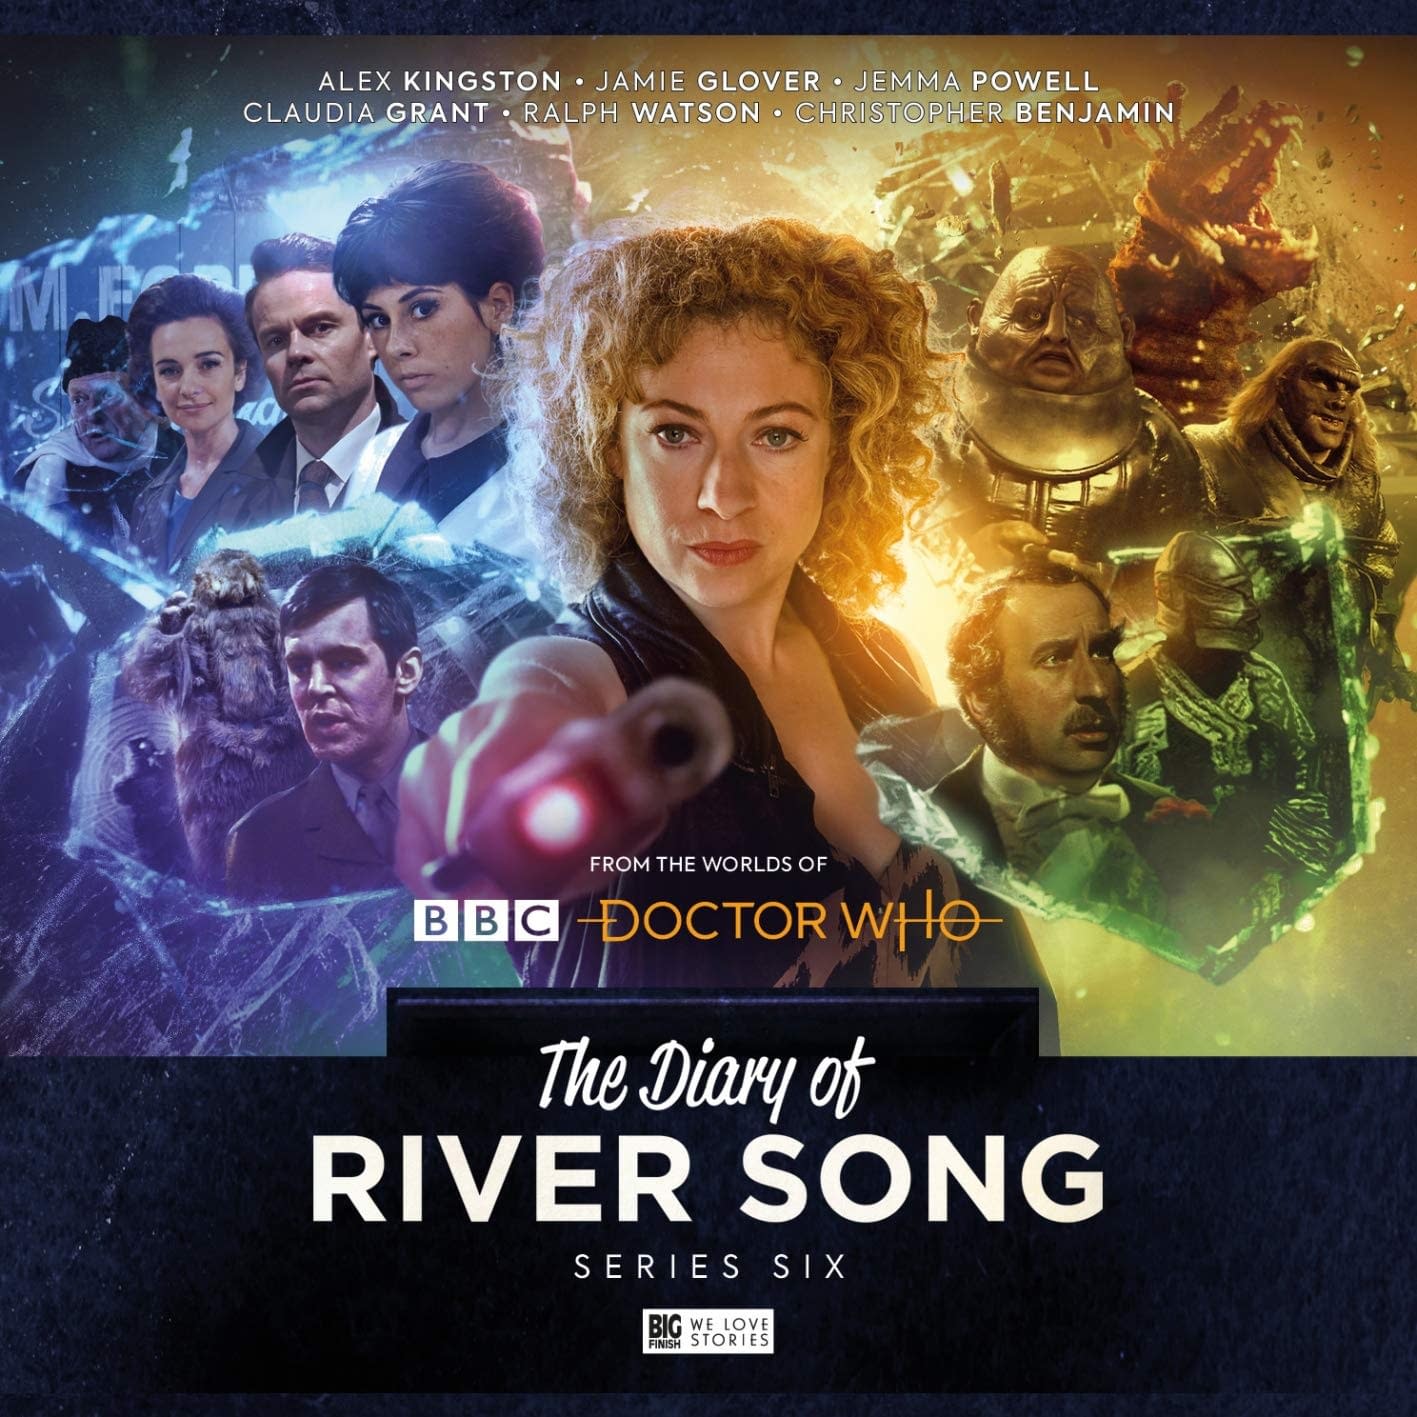 "The Diary of River Song: Series Six": Fan Service at Its Purest [SPOILER REVIEW]